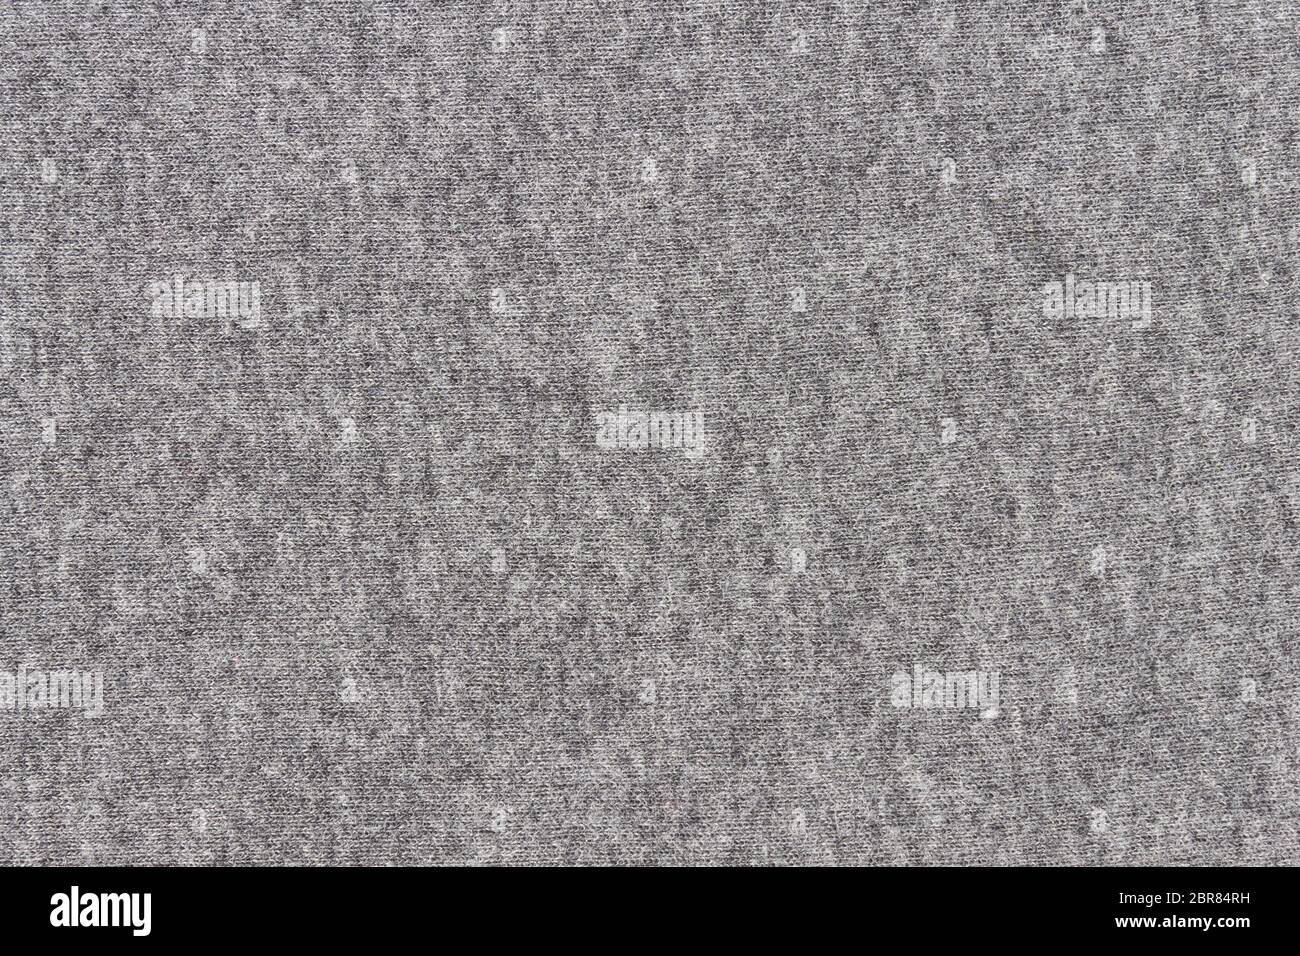 Gray Fabric Texture Background. Old Fabric texture background for ...